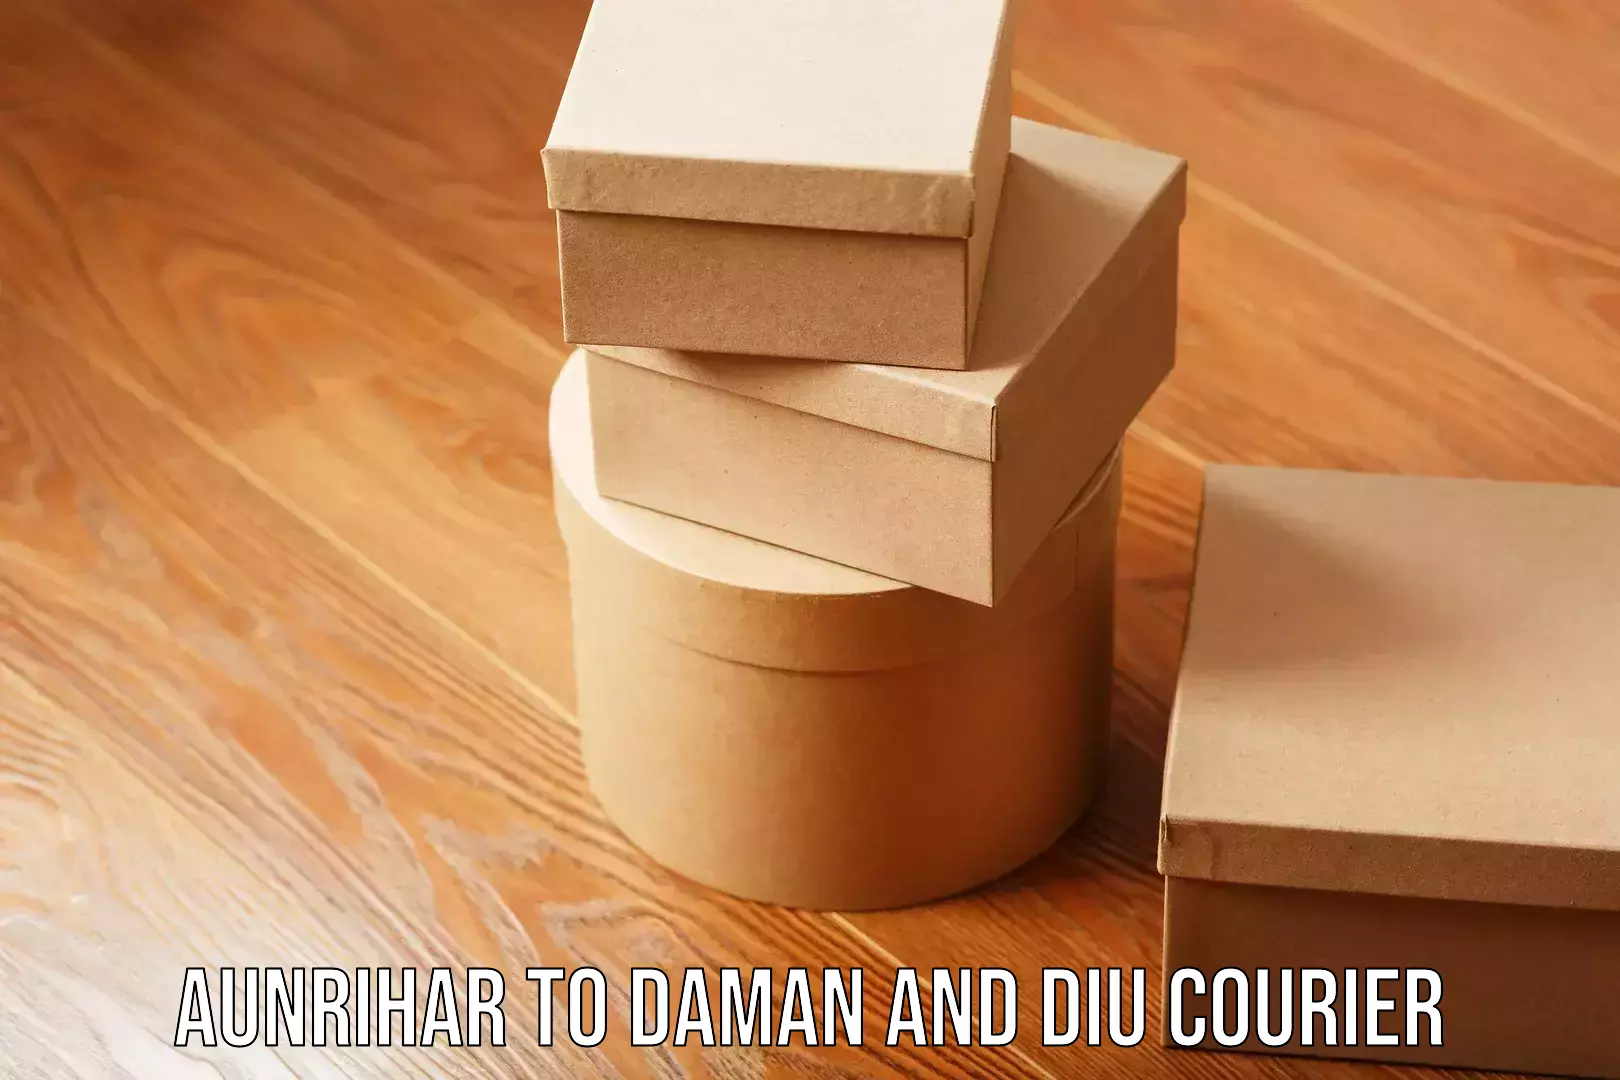 Reliable shipping partners Aunrihar to Daman and Diu